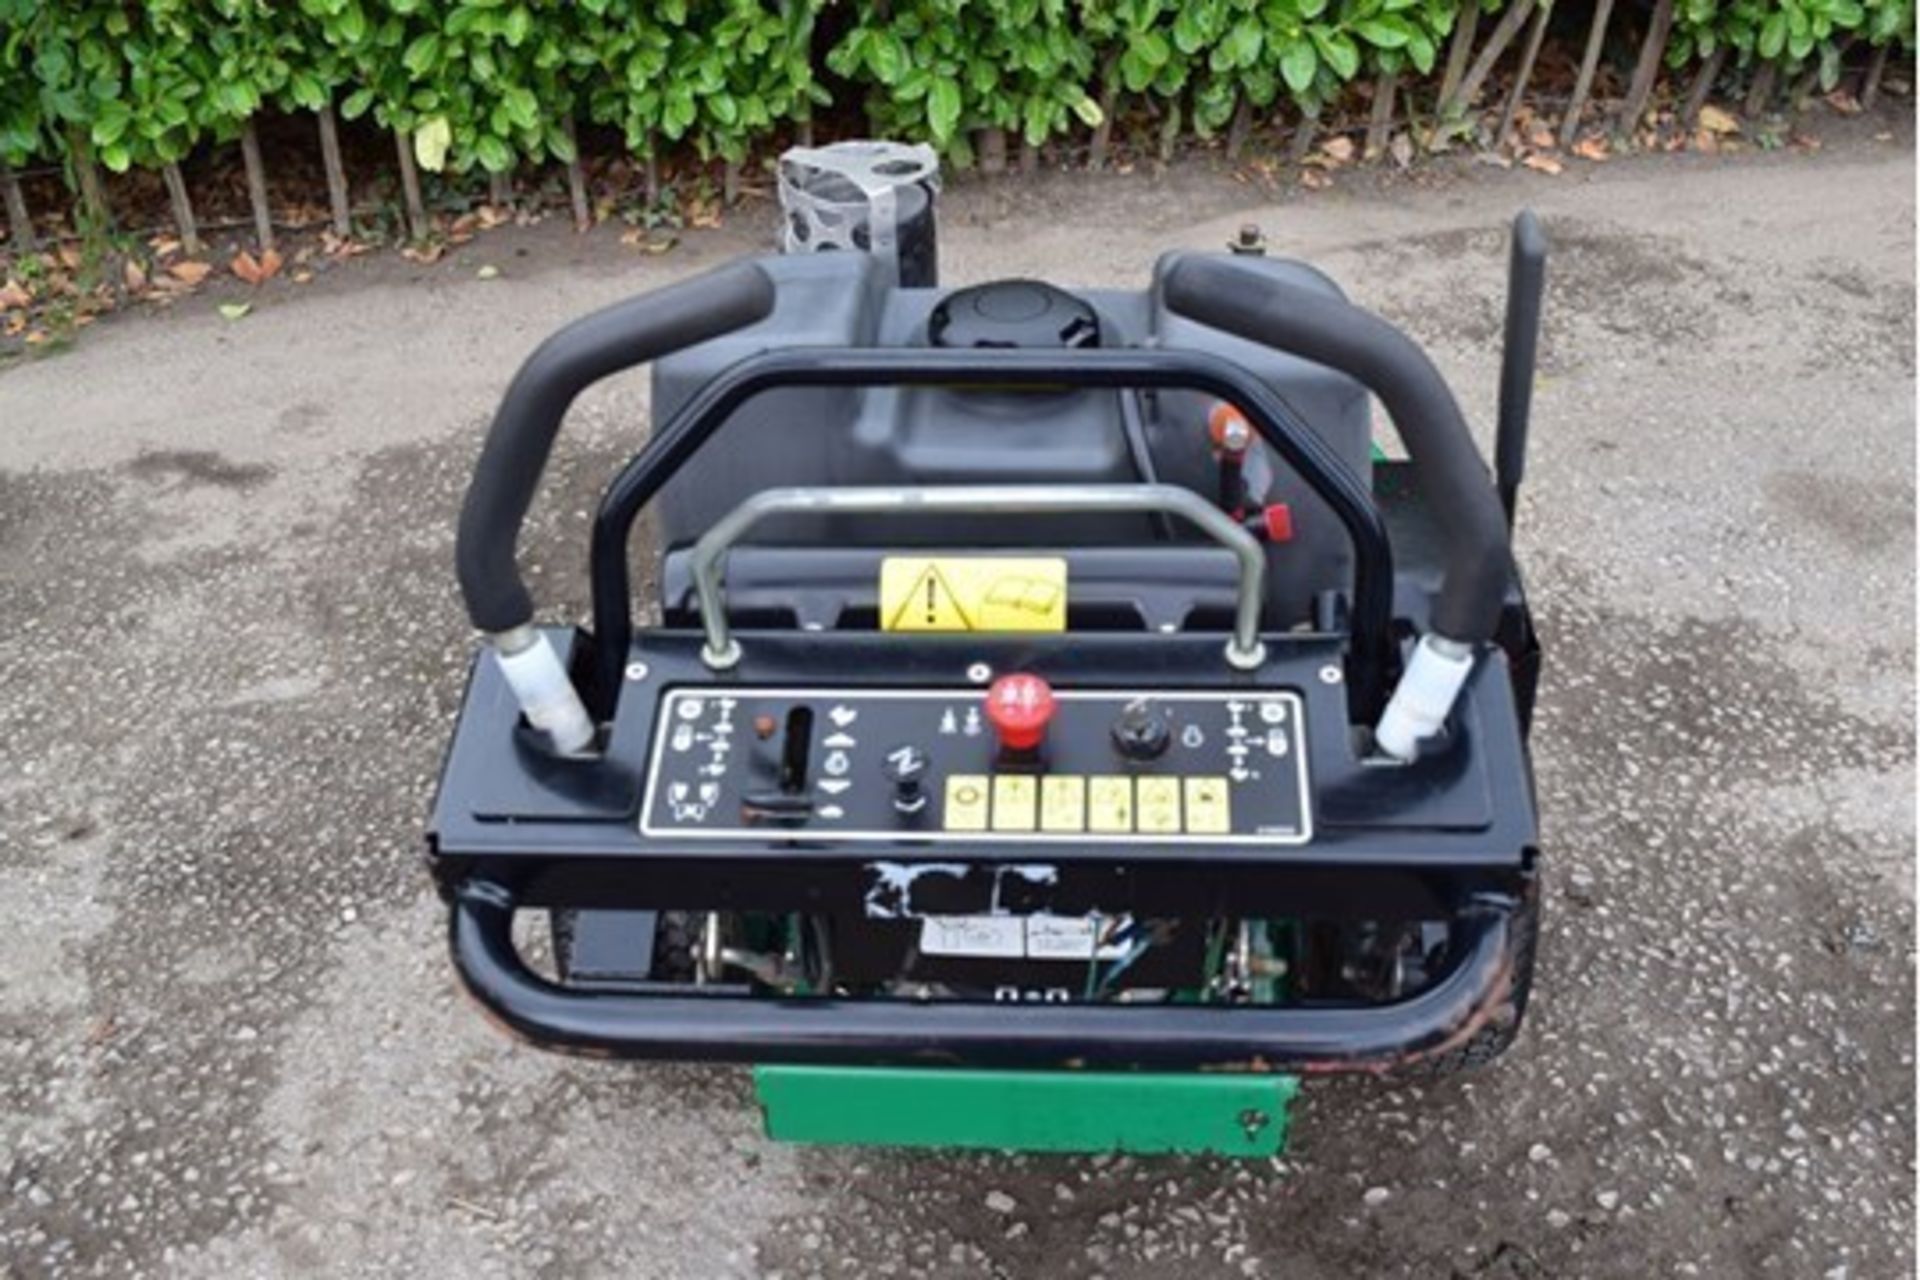 2011 Ransomes Pedestrian 36" Commercial Mower - Image 2 of 8